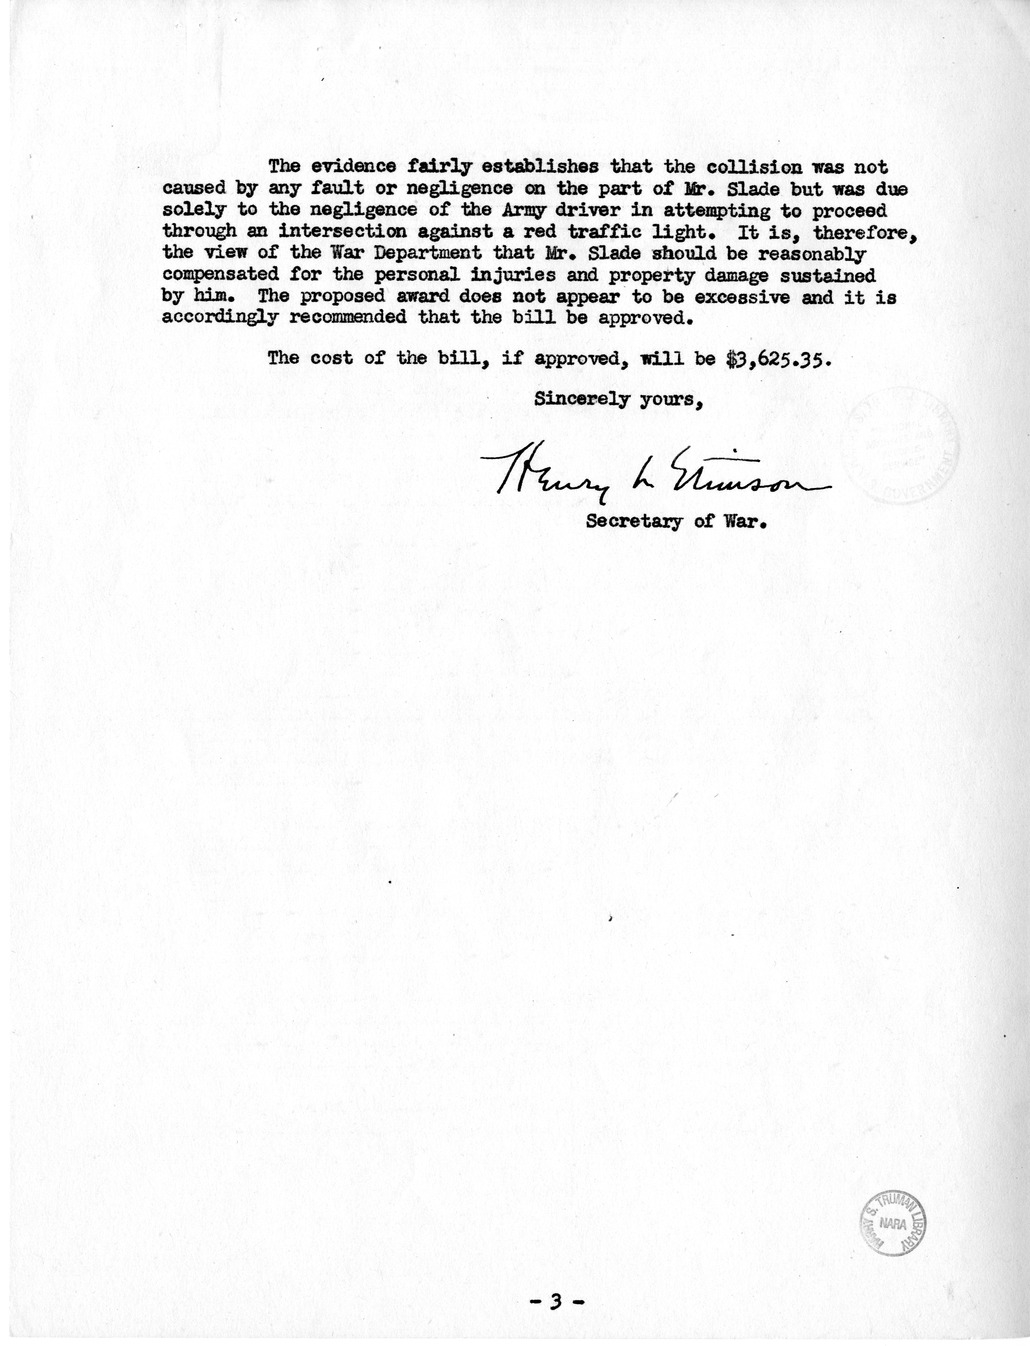 Memorandum from Frederick J. Bailey to M. C. Latta, H.R. 1602, For the Relief of Robert Lee Slade, with Attachments